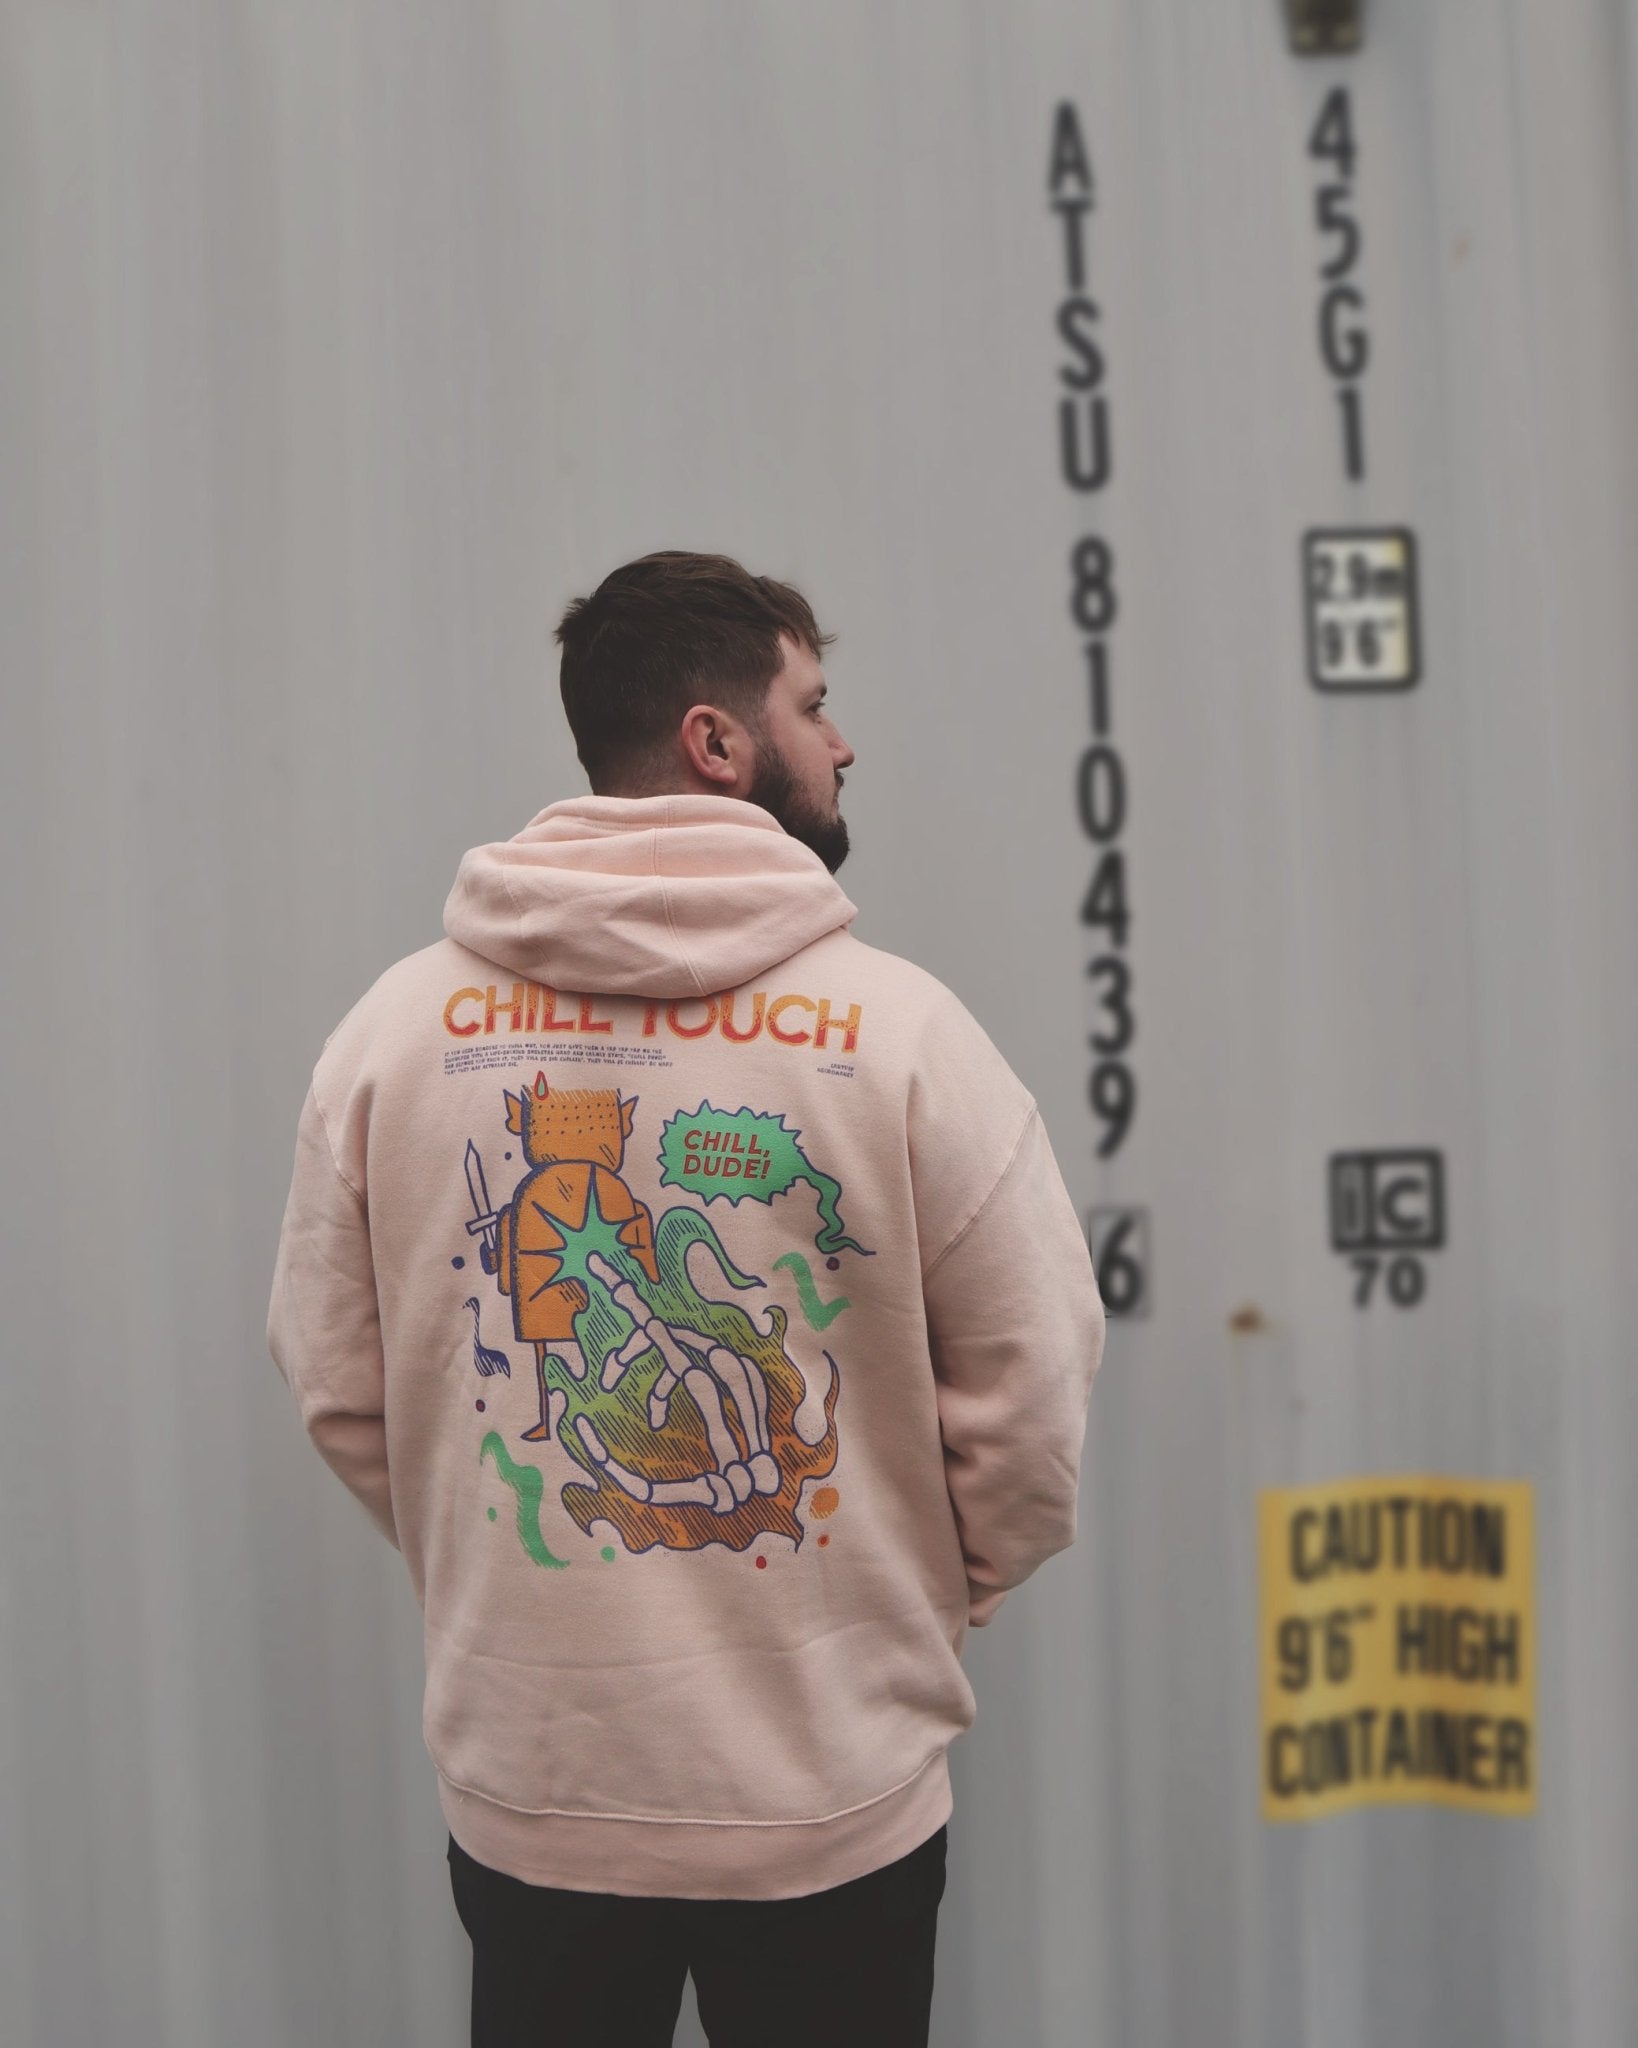 Chill Touch | Premium Pullover Hoodie - Hoodie - Ace of Gnomes - 28788096511784920768